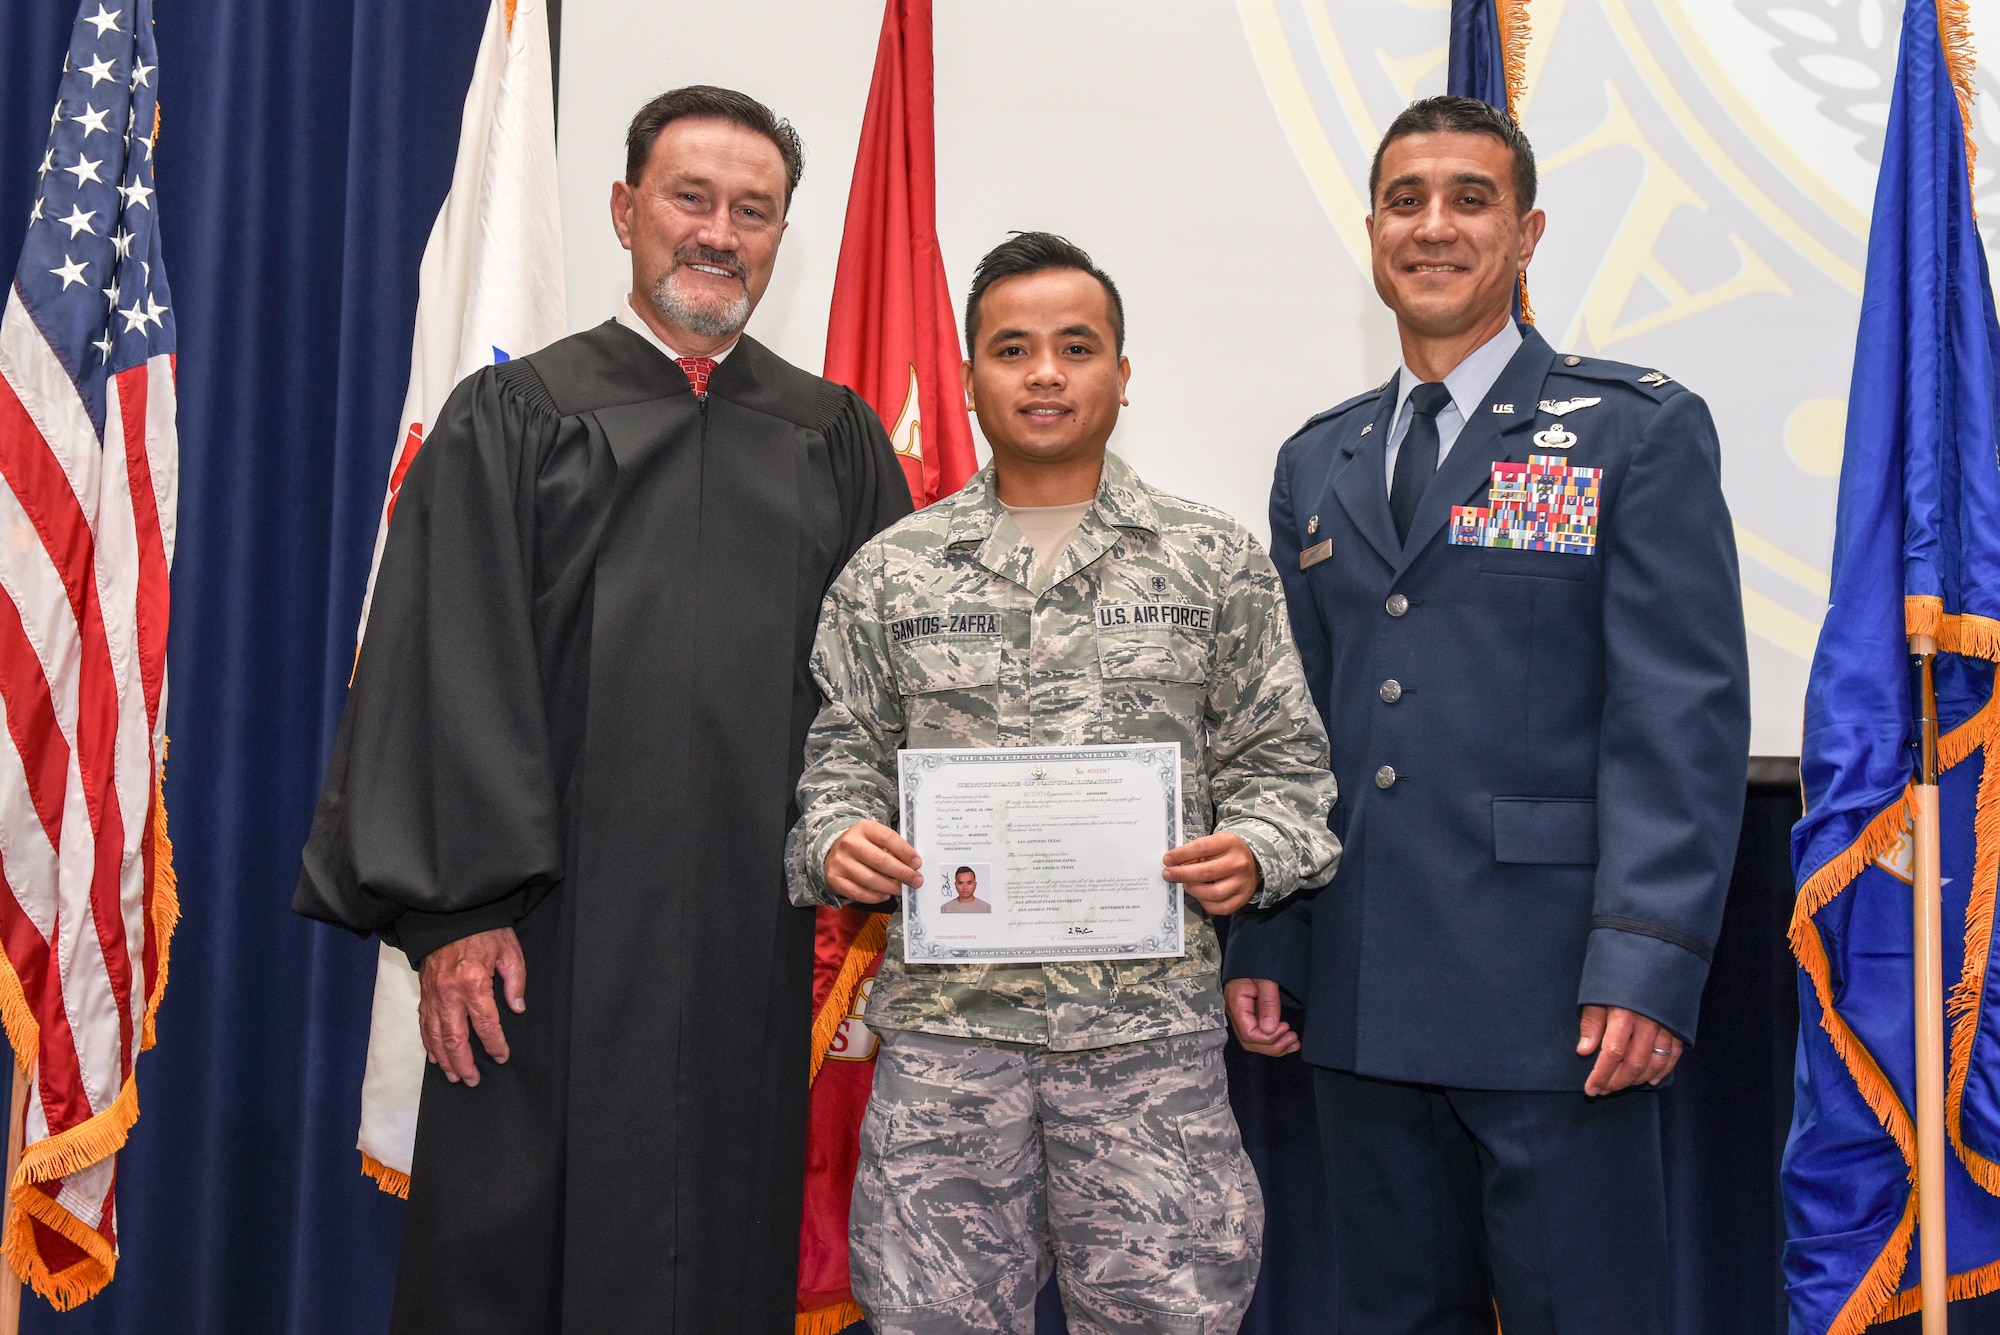 U.S. Magistrate Judge E. Scott Frost, U.S. Air Force Senior Airman John Santos Zafra, 17th Medical Operations Squadron public health technician and  Col. Ricky Mills, 17th Training Wing commander, pose after the naturalization ceremony held at the CJ Davidson Center on Angelo State University, San Angelo, Texas, Sept. 25, 2018. Zapfra was born in the Phillipines and moved to the U.S. when was 13 to live in Burleson, Texas. (U.S. Air Force photo by Aryn Lockhart/Released)